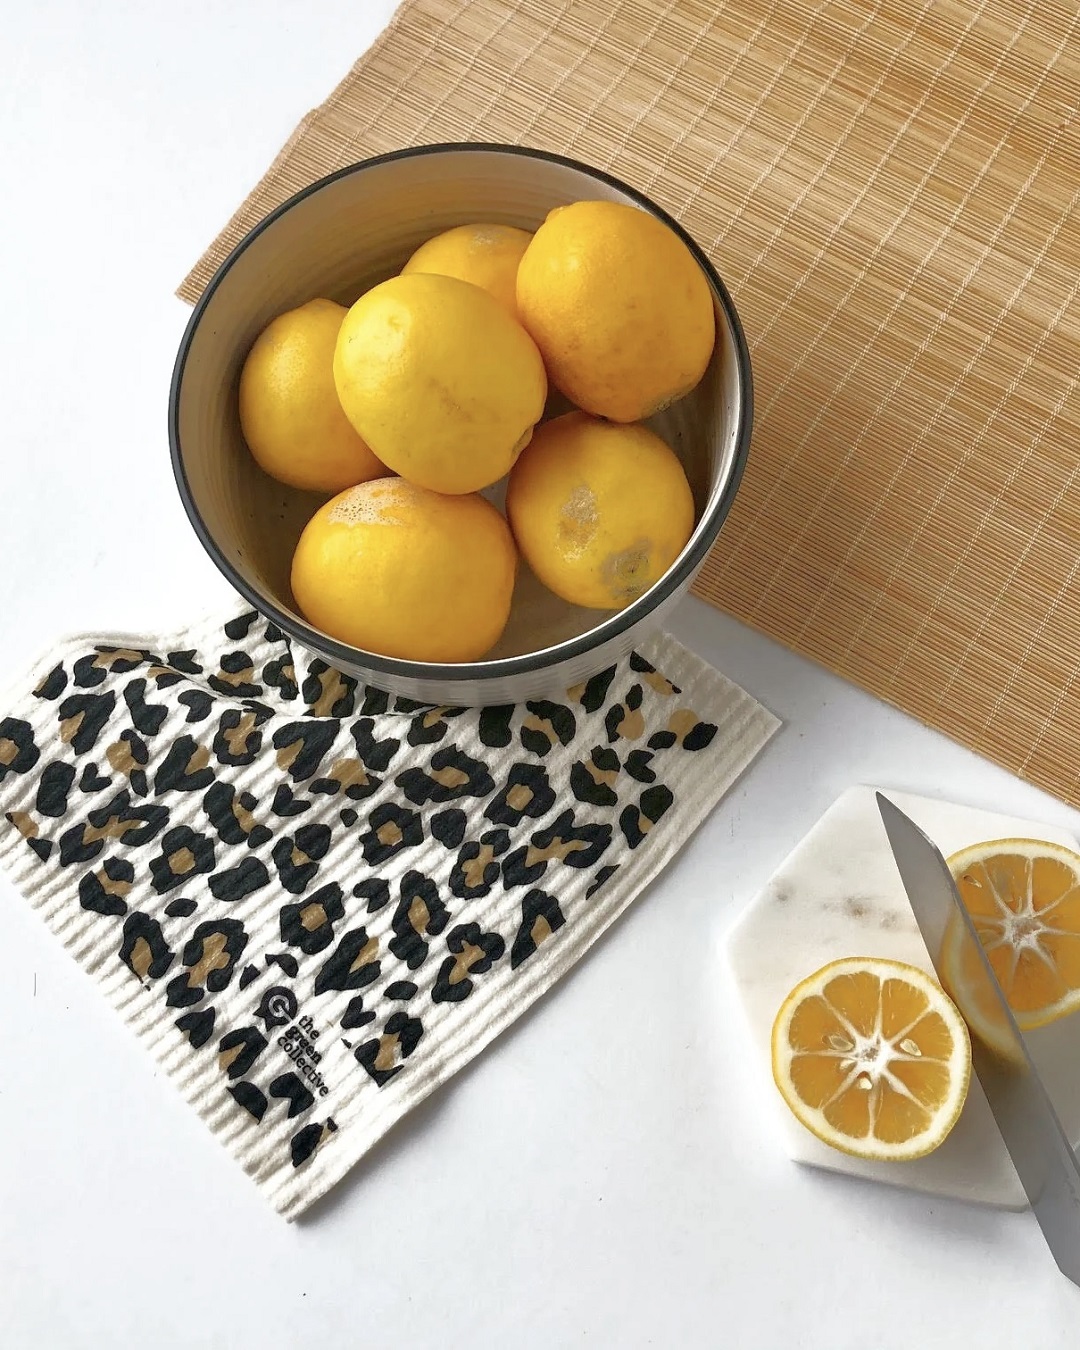 Leopard print dish cloth on bench with bowl and oranges